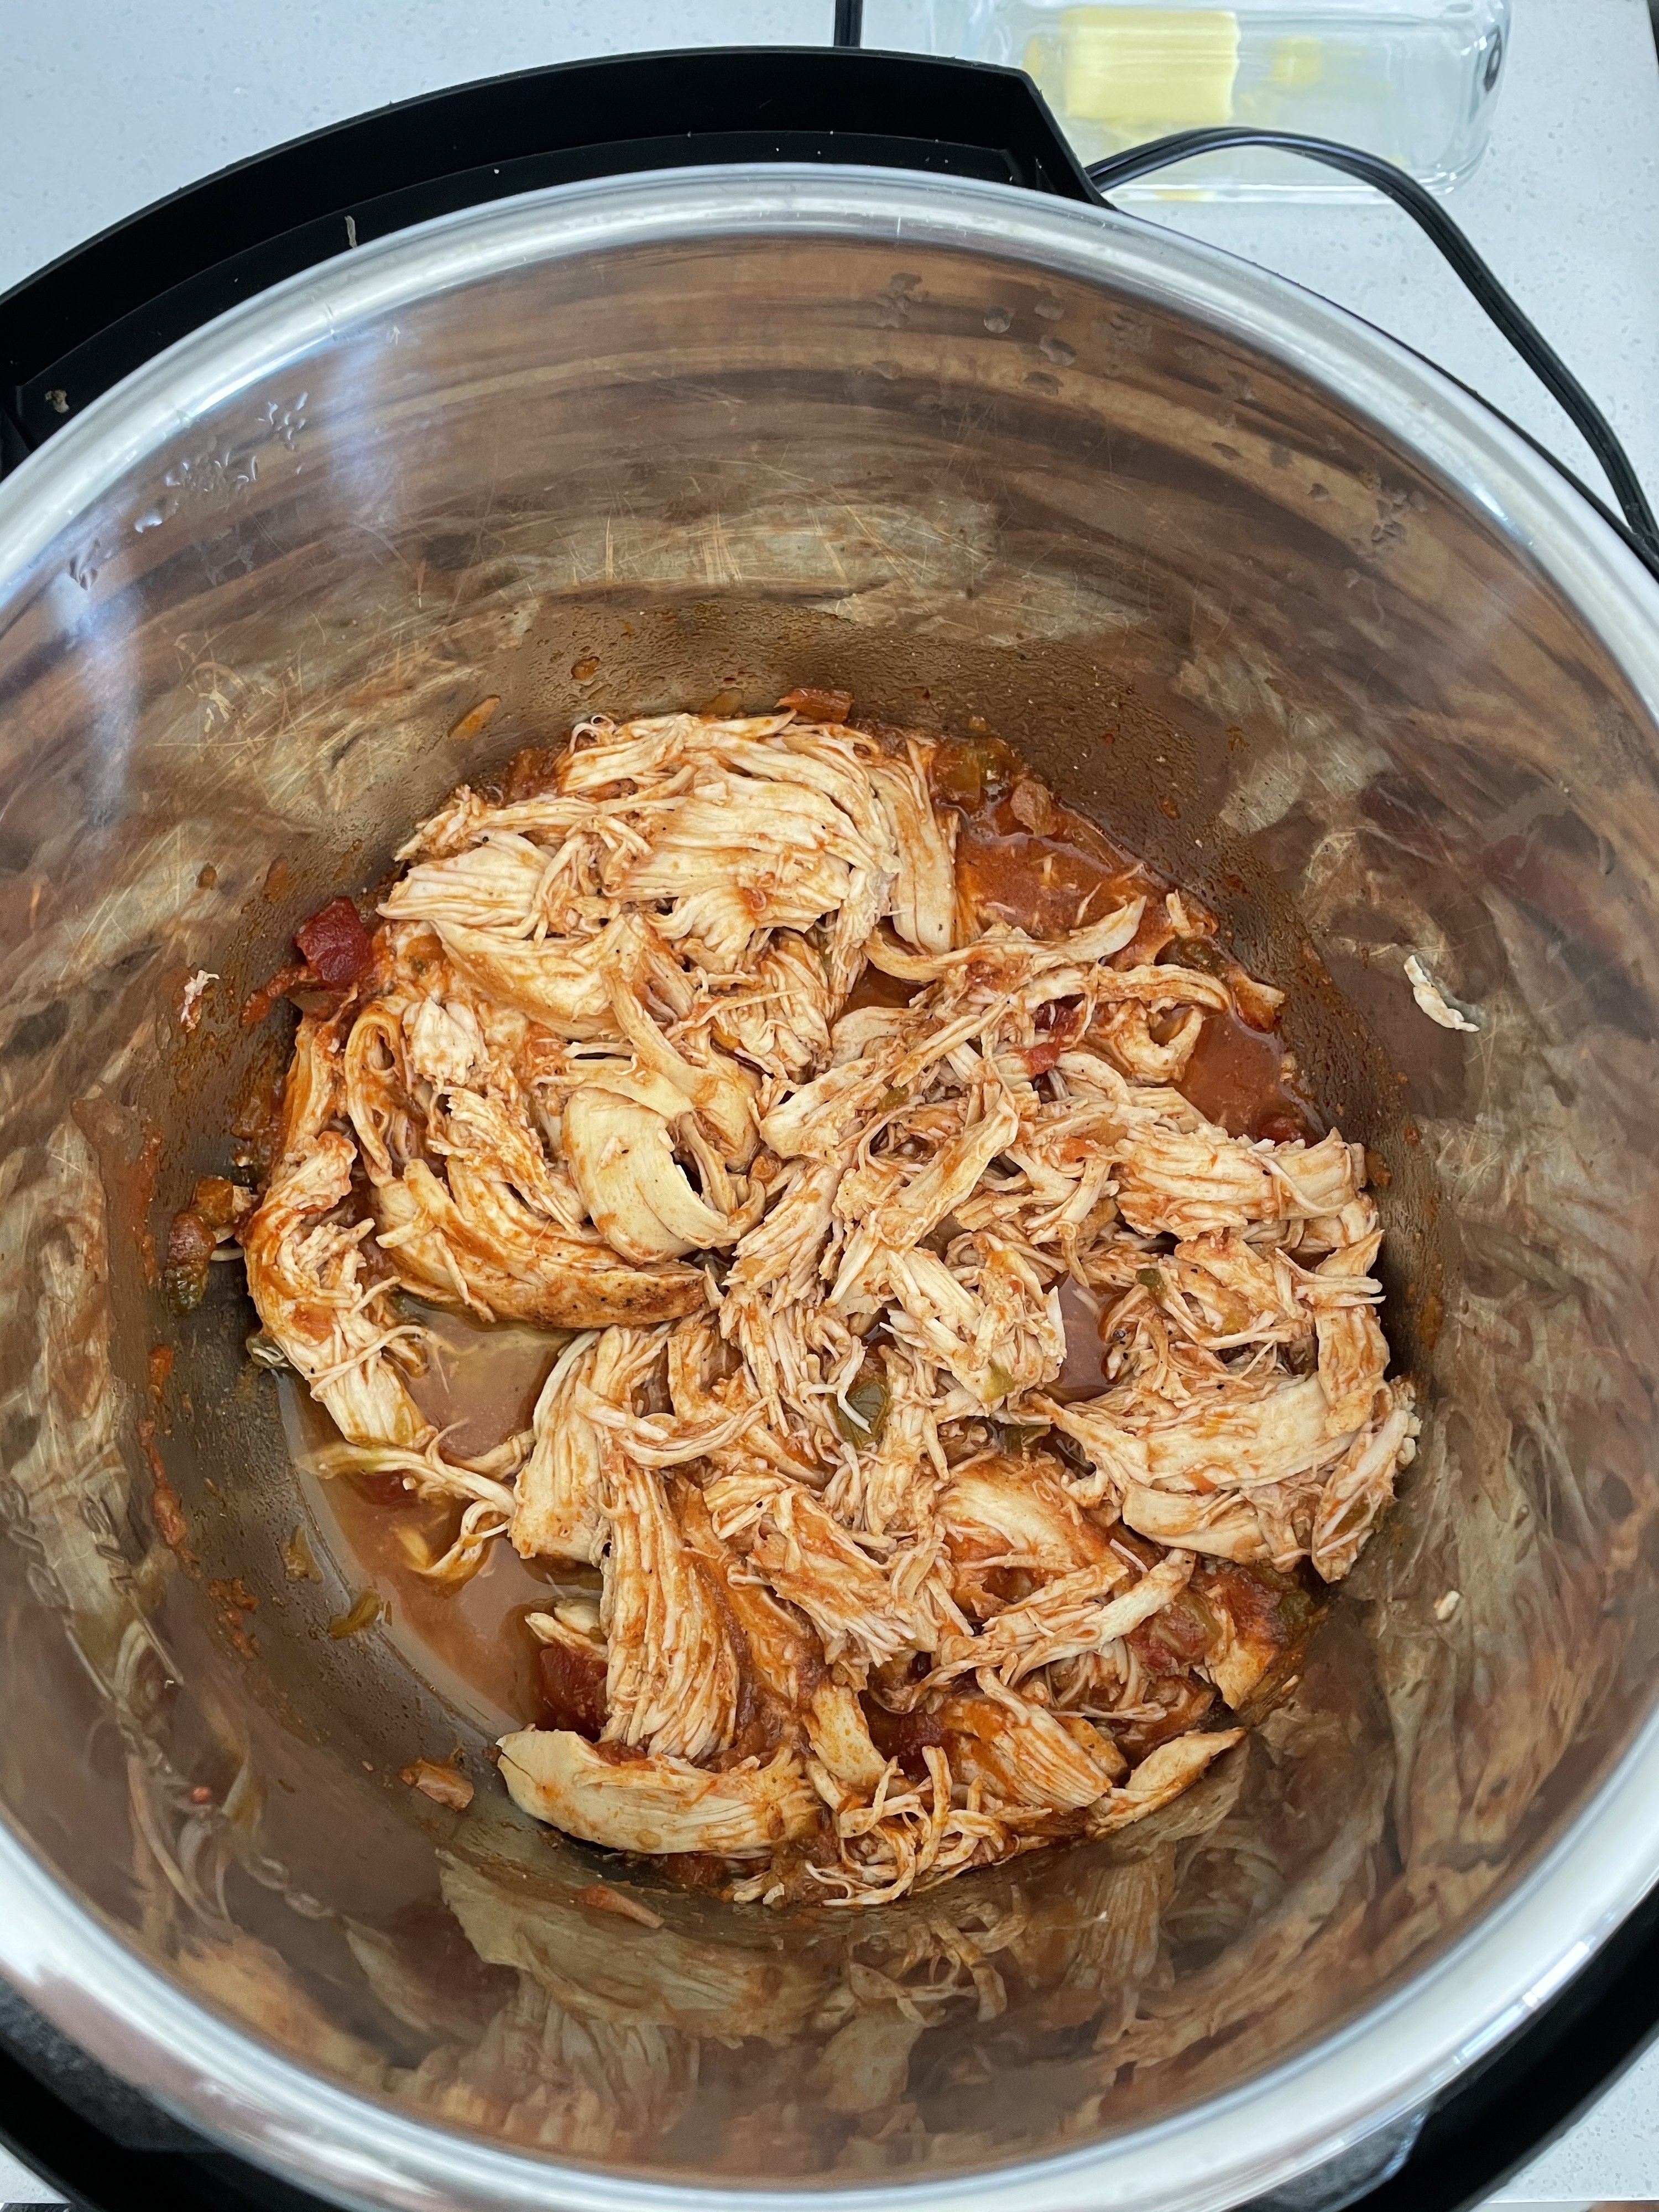 Chicken cooked in an Instant Pot